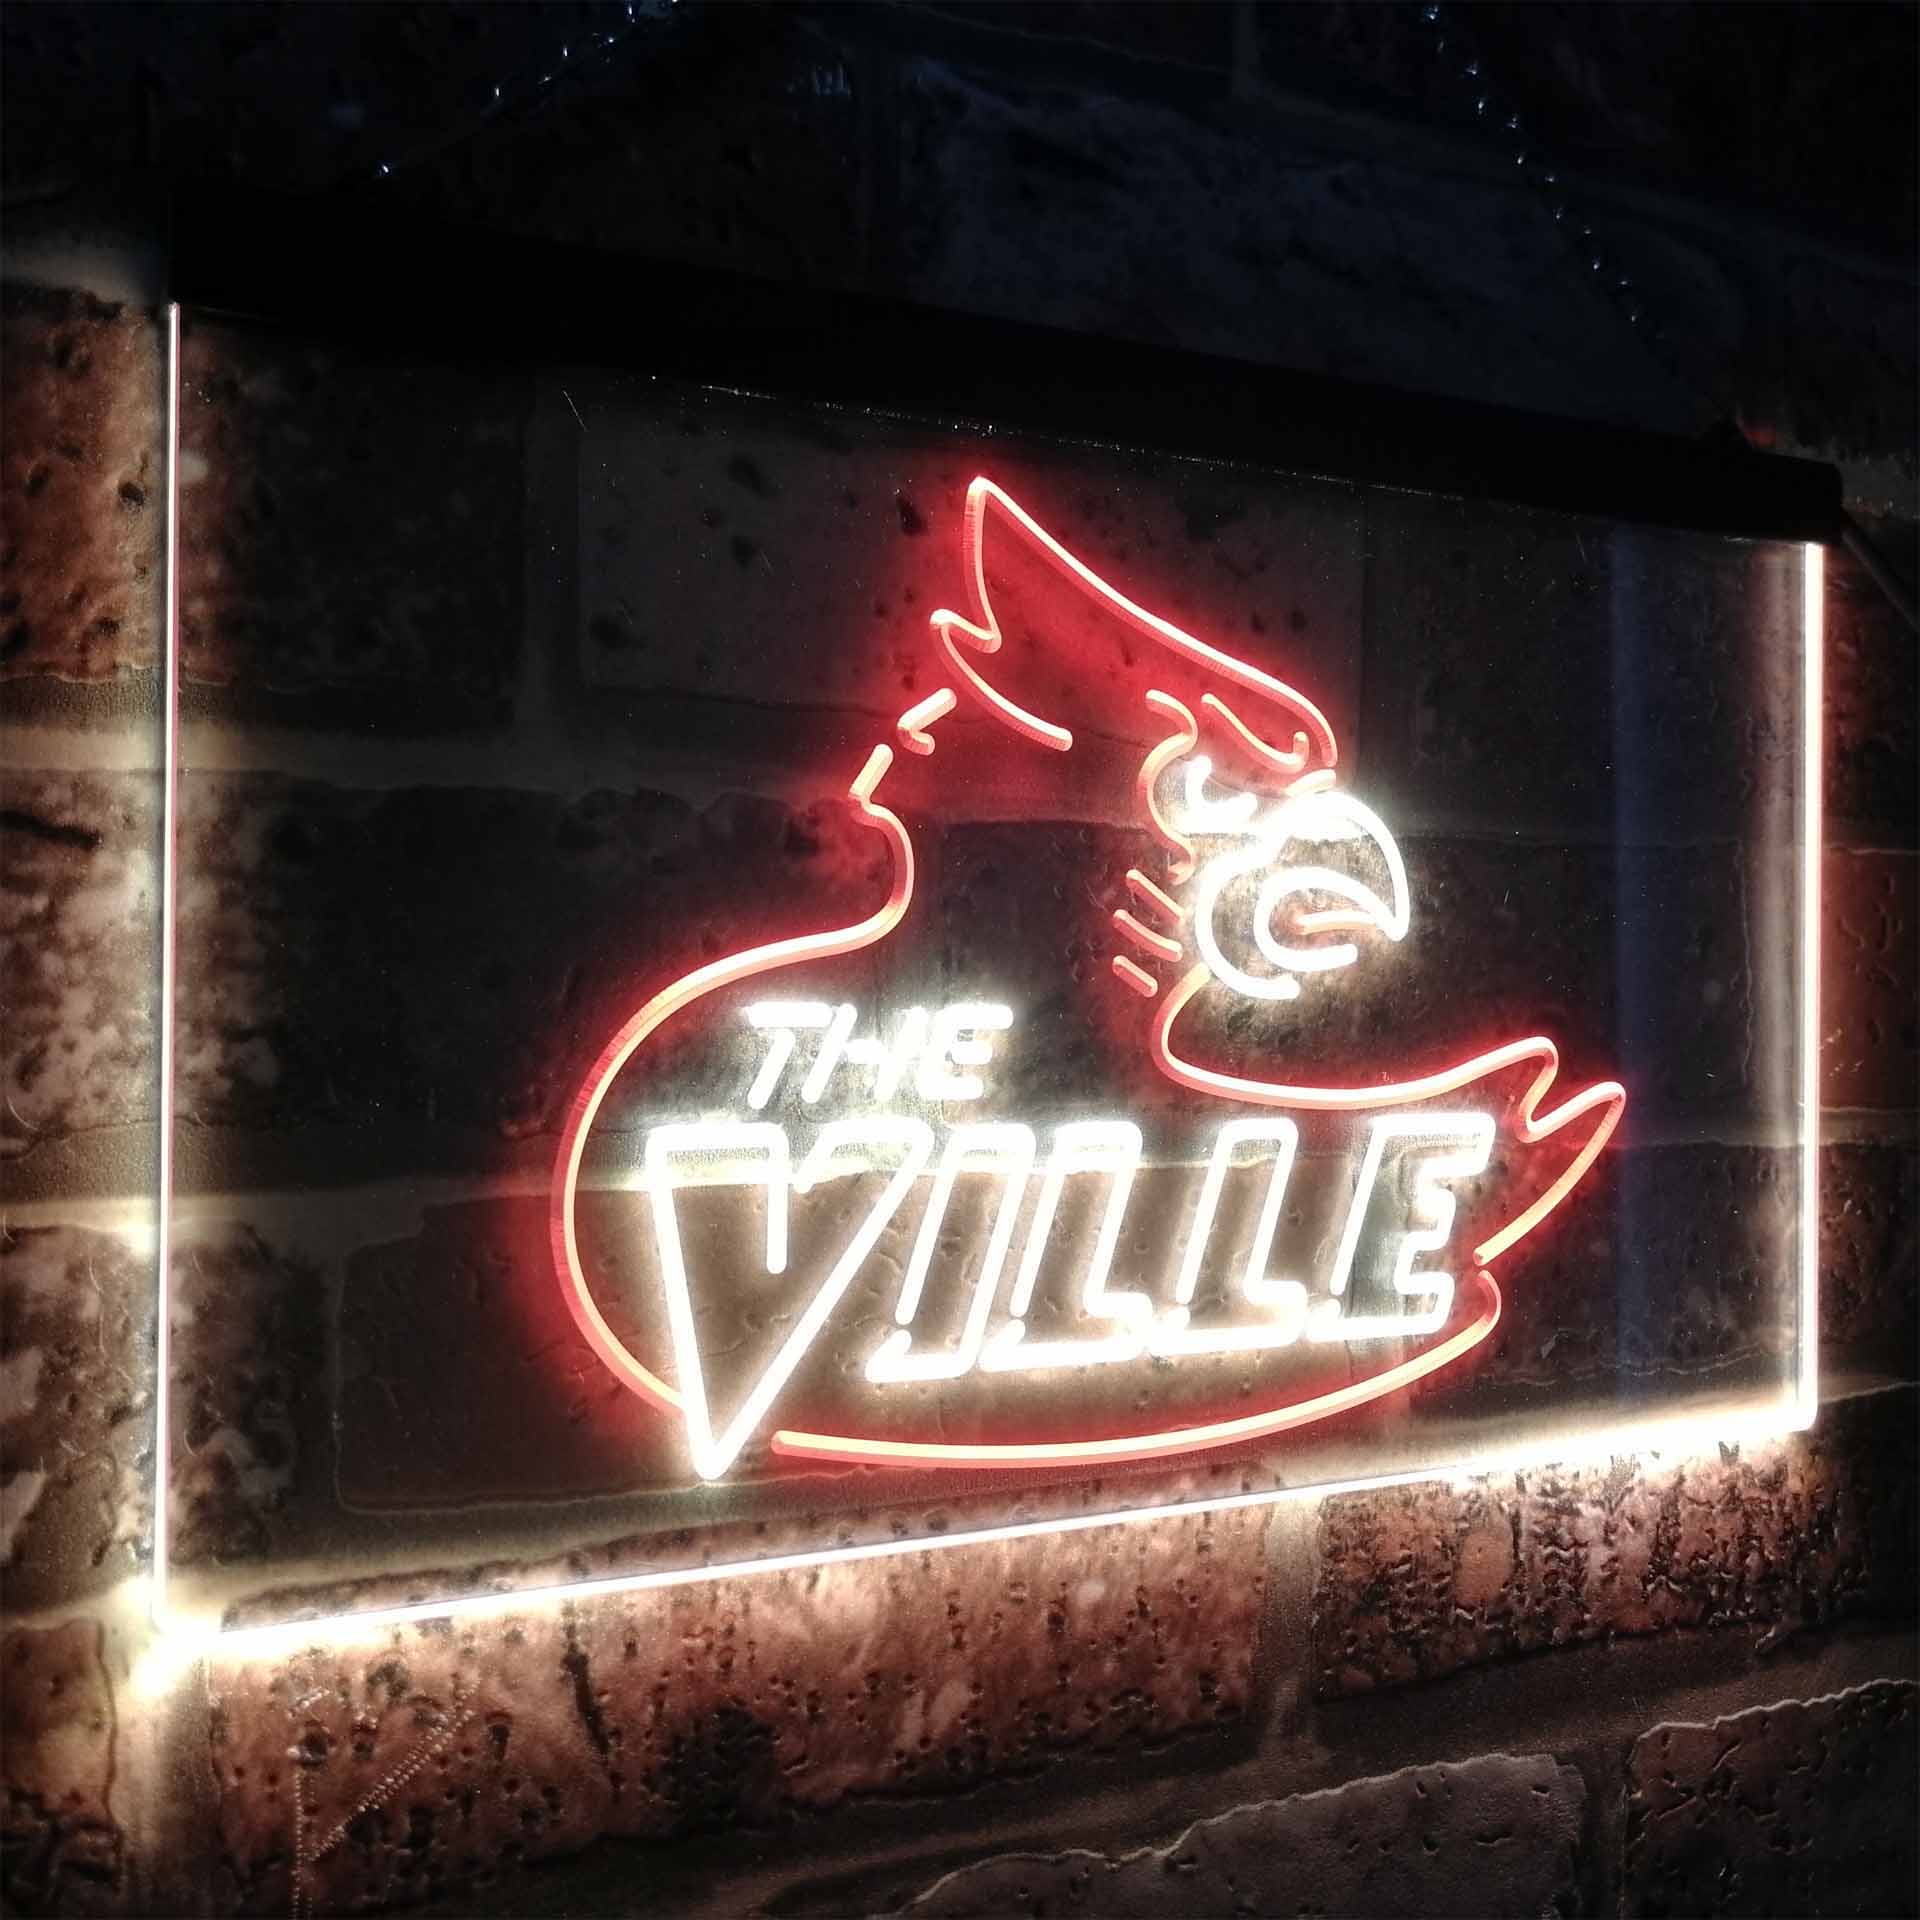 Louisville Cardinals The Ville Neon-Like LED Sign